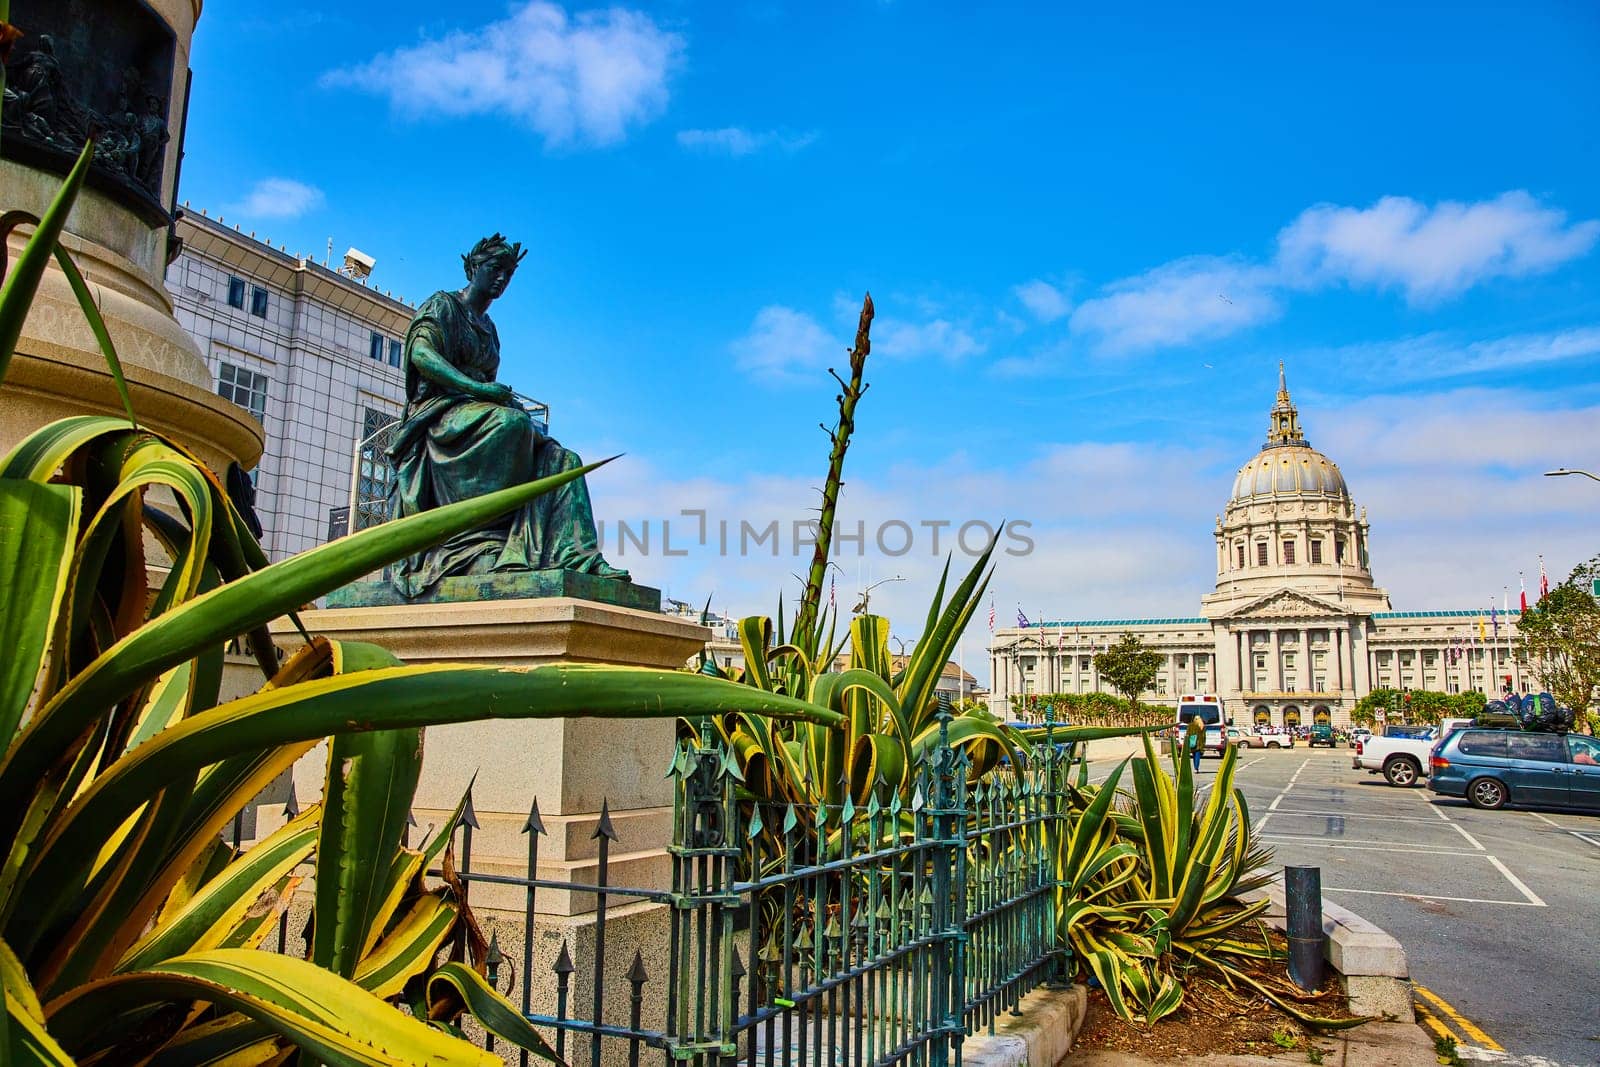 Image of Plants beside Pioneer Monument with distant city hall on blue sky day with soft purple clouds